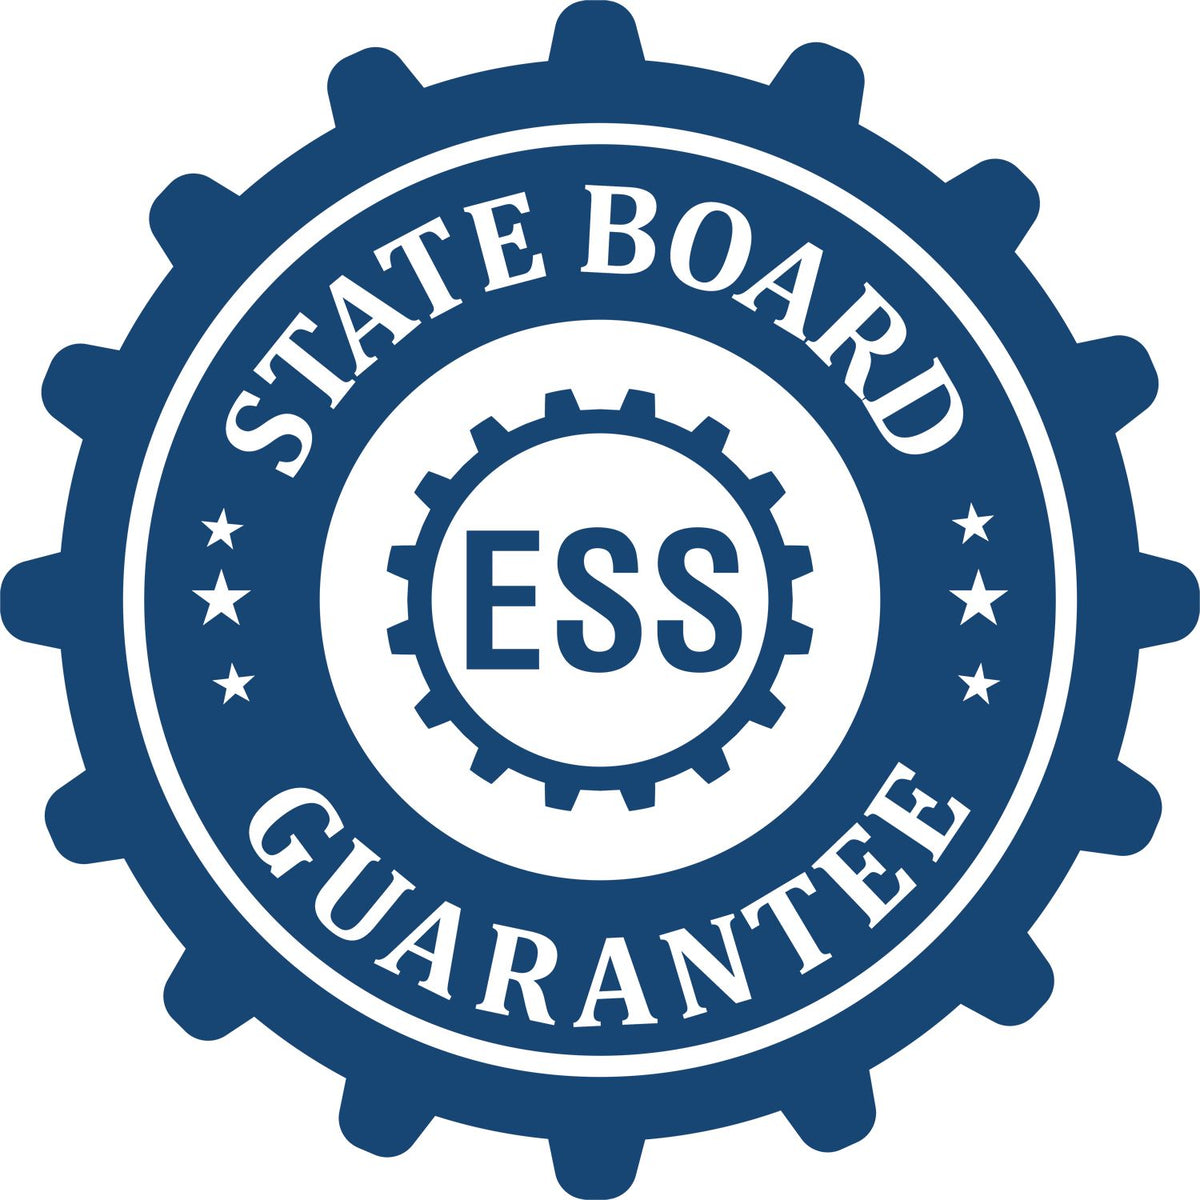 An emblem in a gear shape illustrating a state board guarantee for the State of Illinois Extended Long Reach Geologist Seal